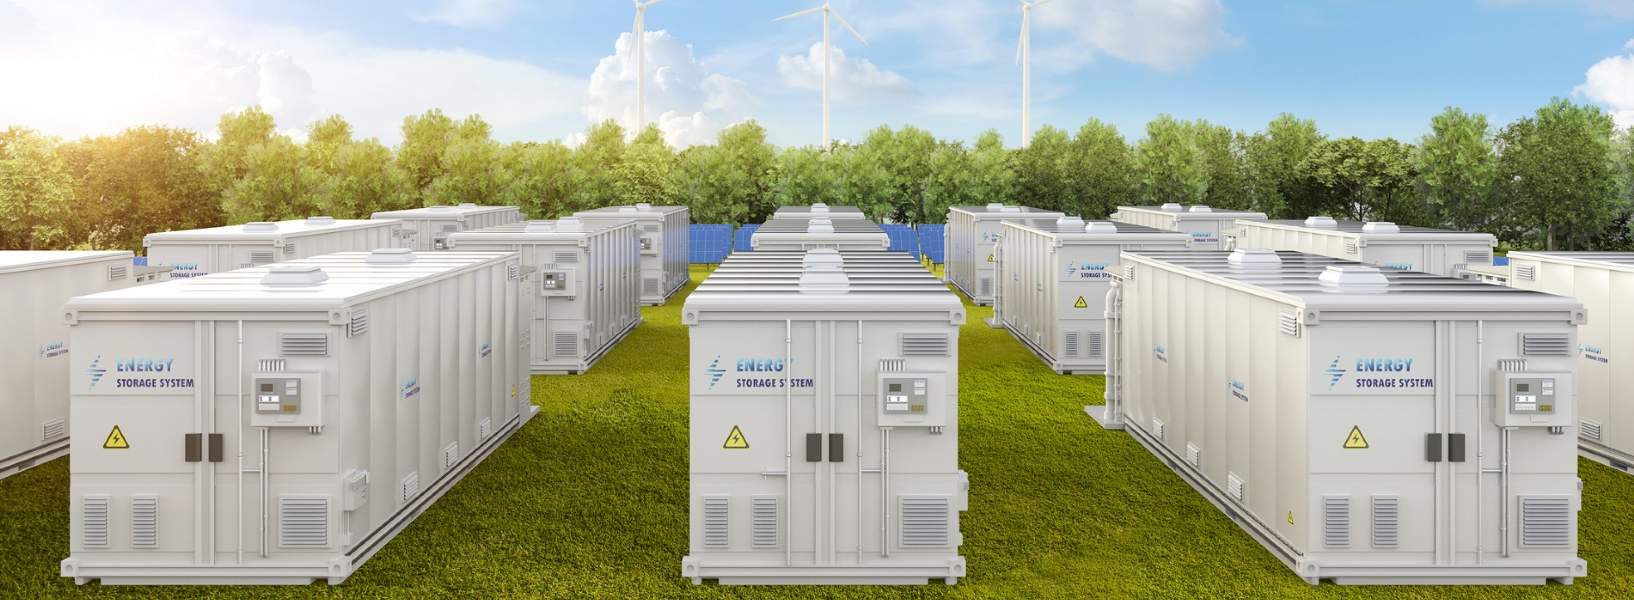 Could battery energy storage systems (BESS) be a significant emerging asset class in Europe?